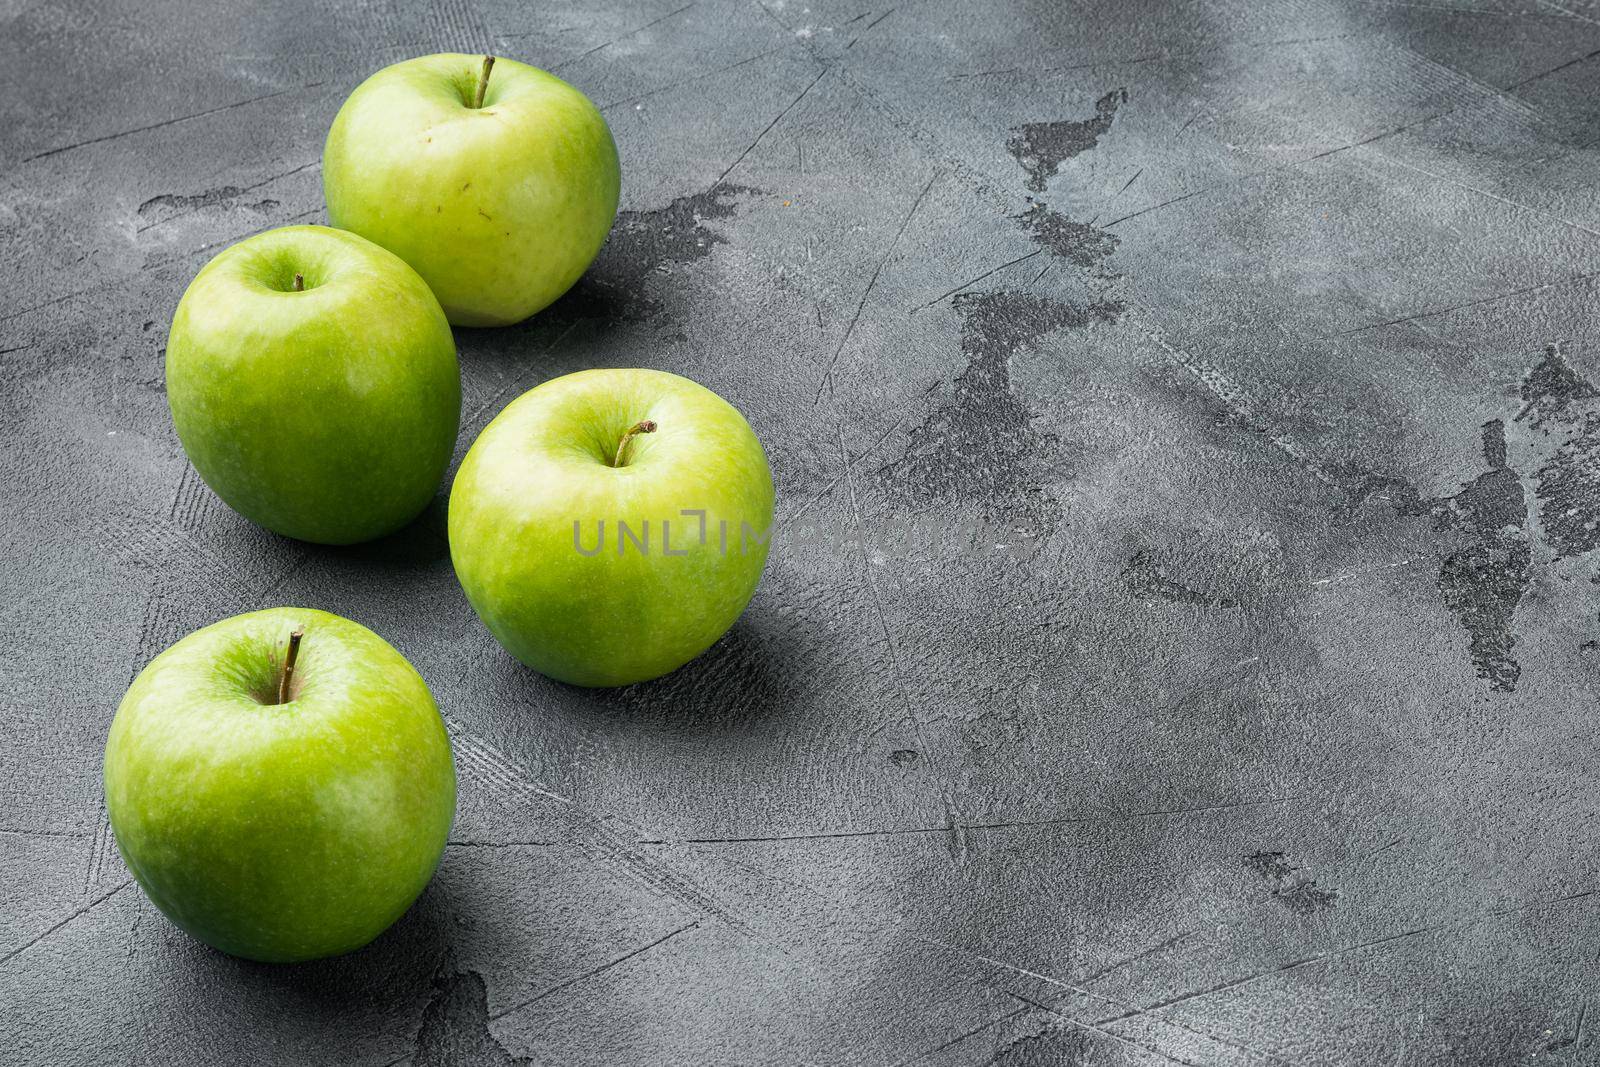 Ripe green apples, on gray stone table background, with copy space for text by Ilianesolenyi